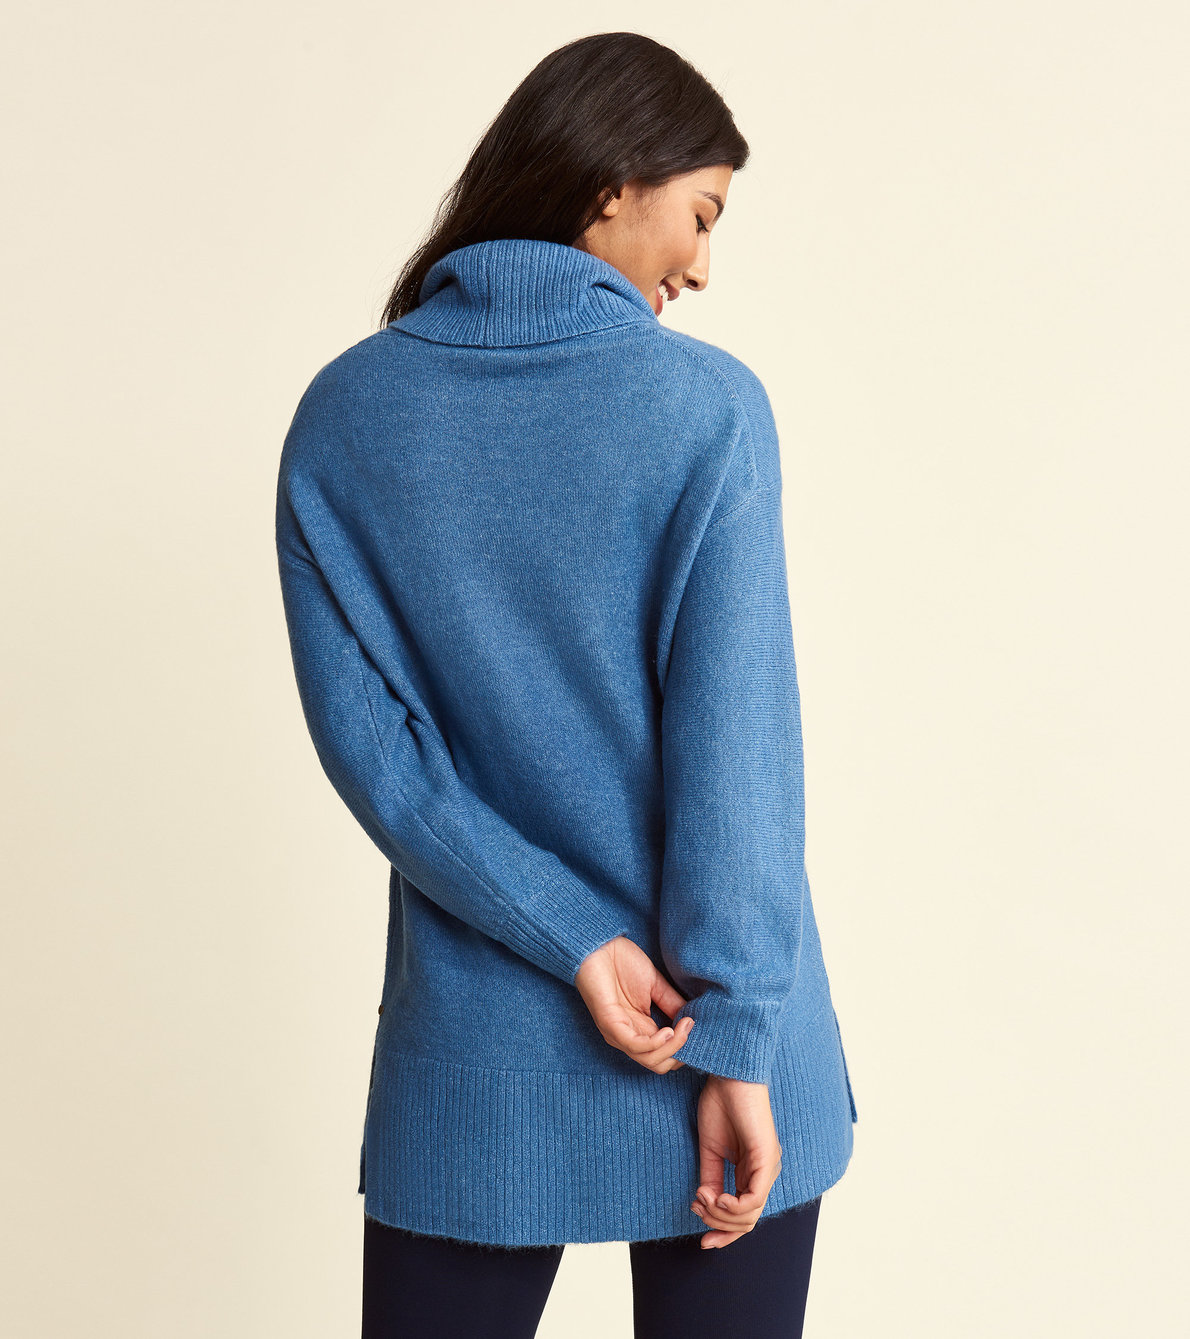 View larger image of Hallie Sweater Tunic - Dutch Blue